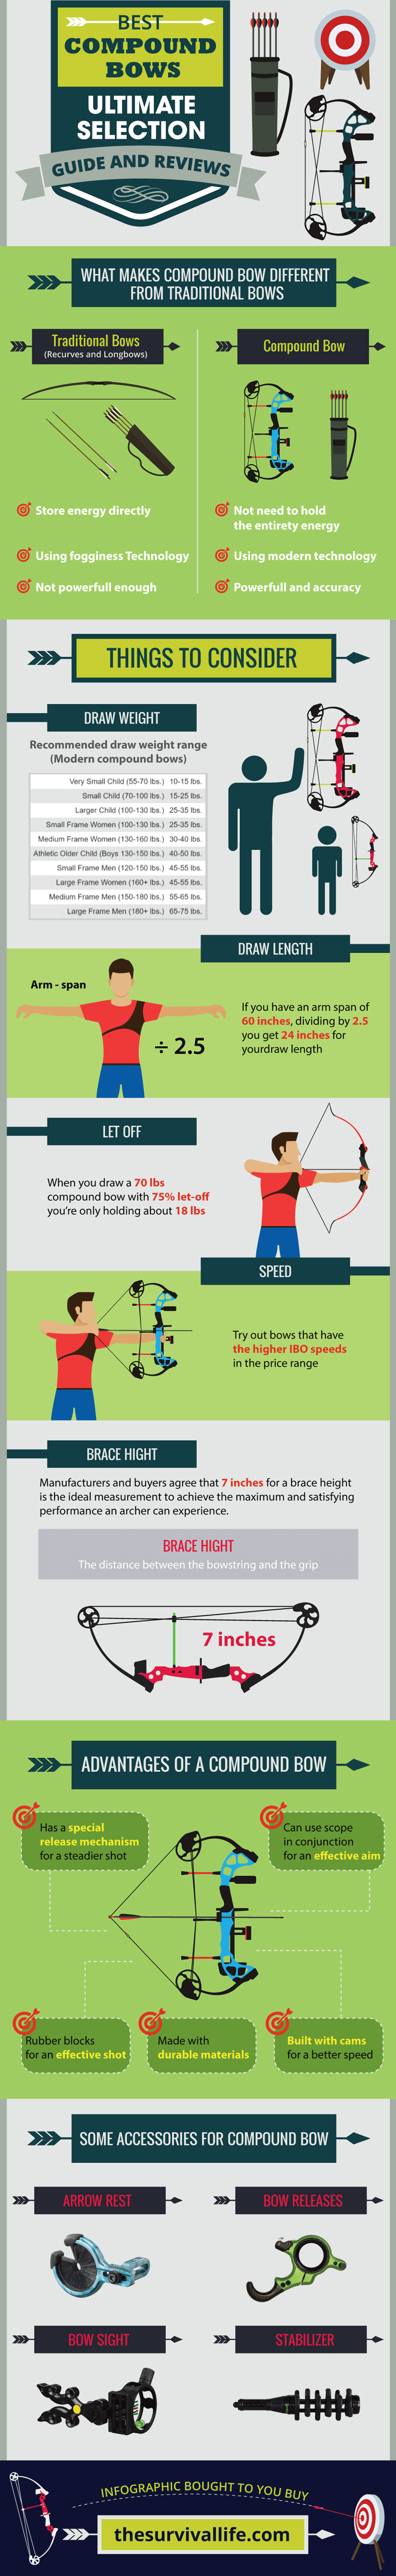 Best-Compound-Bow-infographic